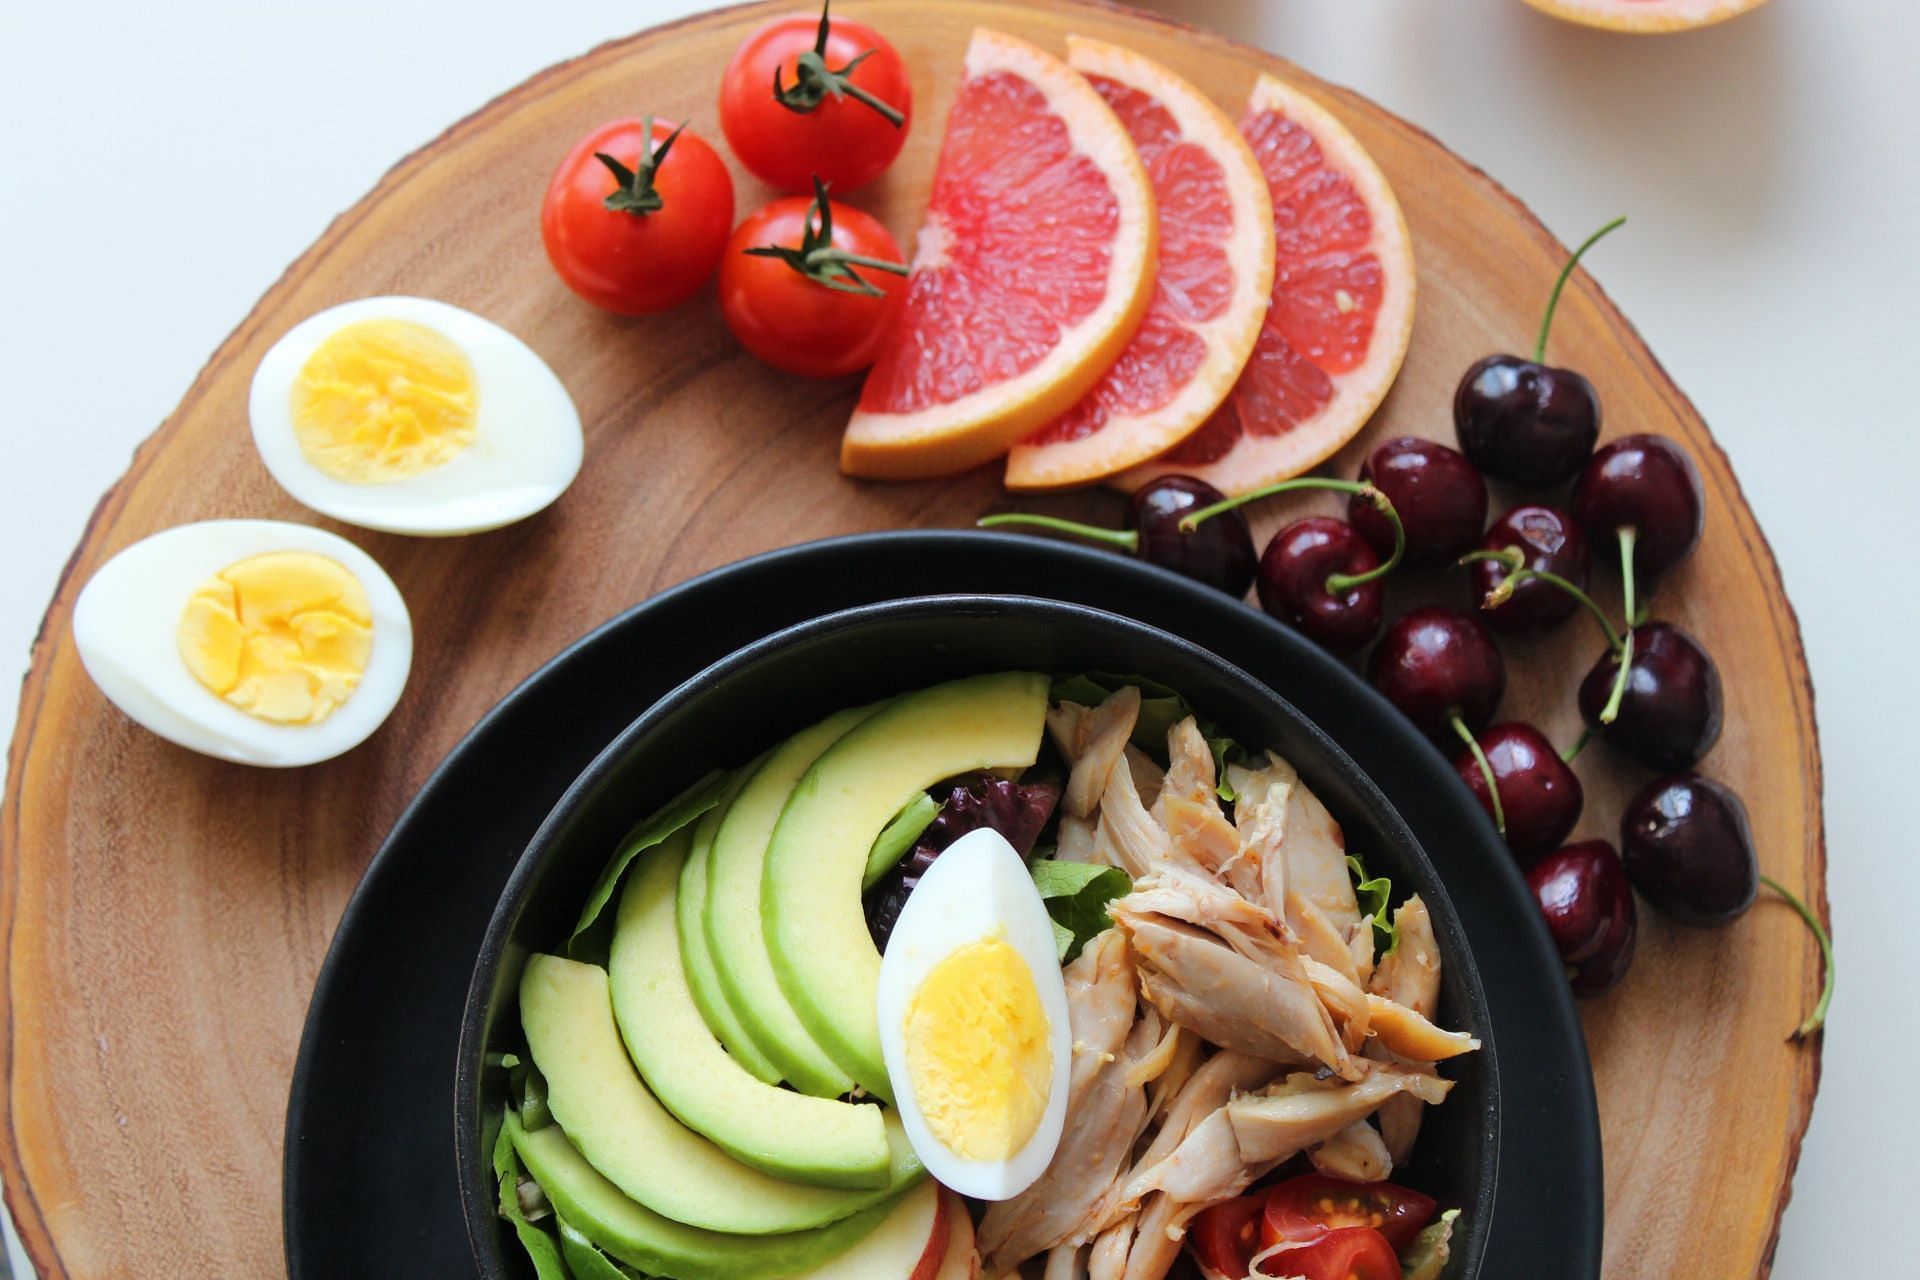 There are several food choices you can eat as your pre-workout meal. (Photo by Trang Doan via pexels)